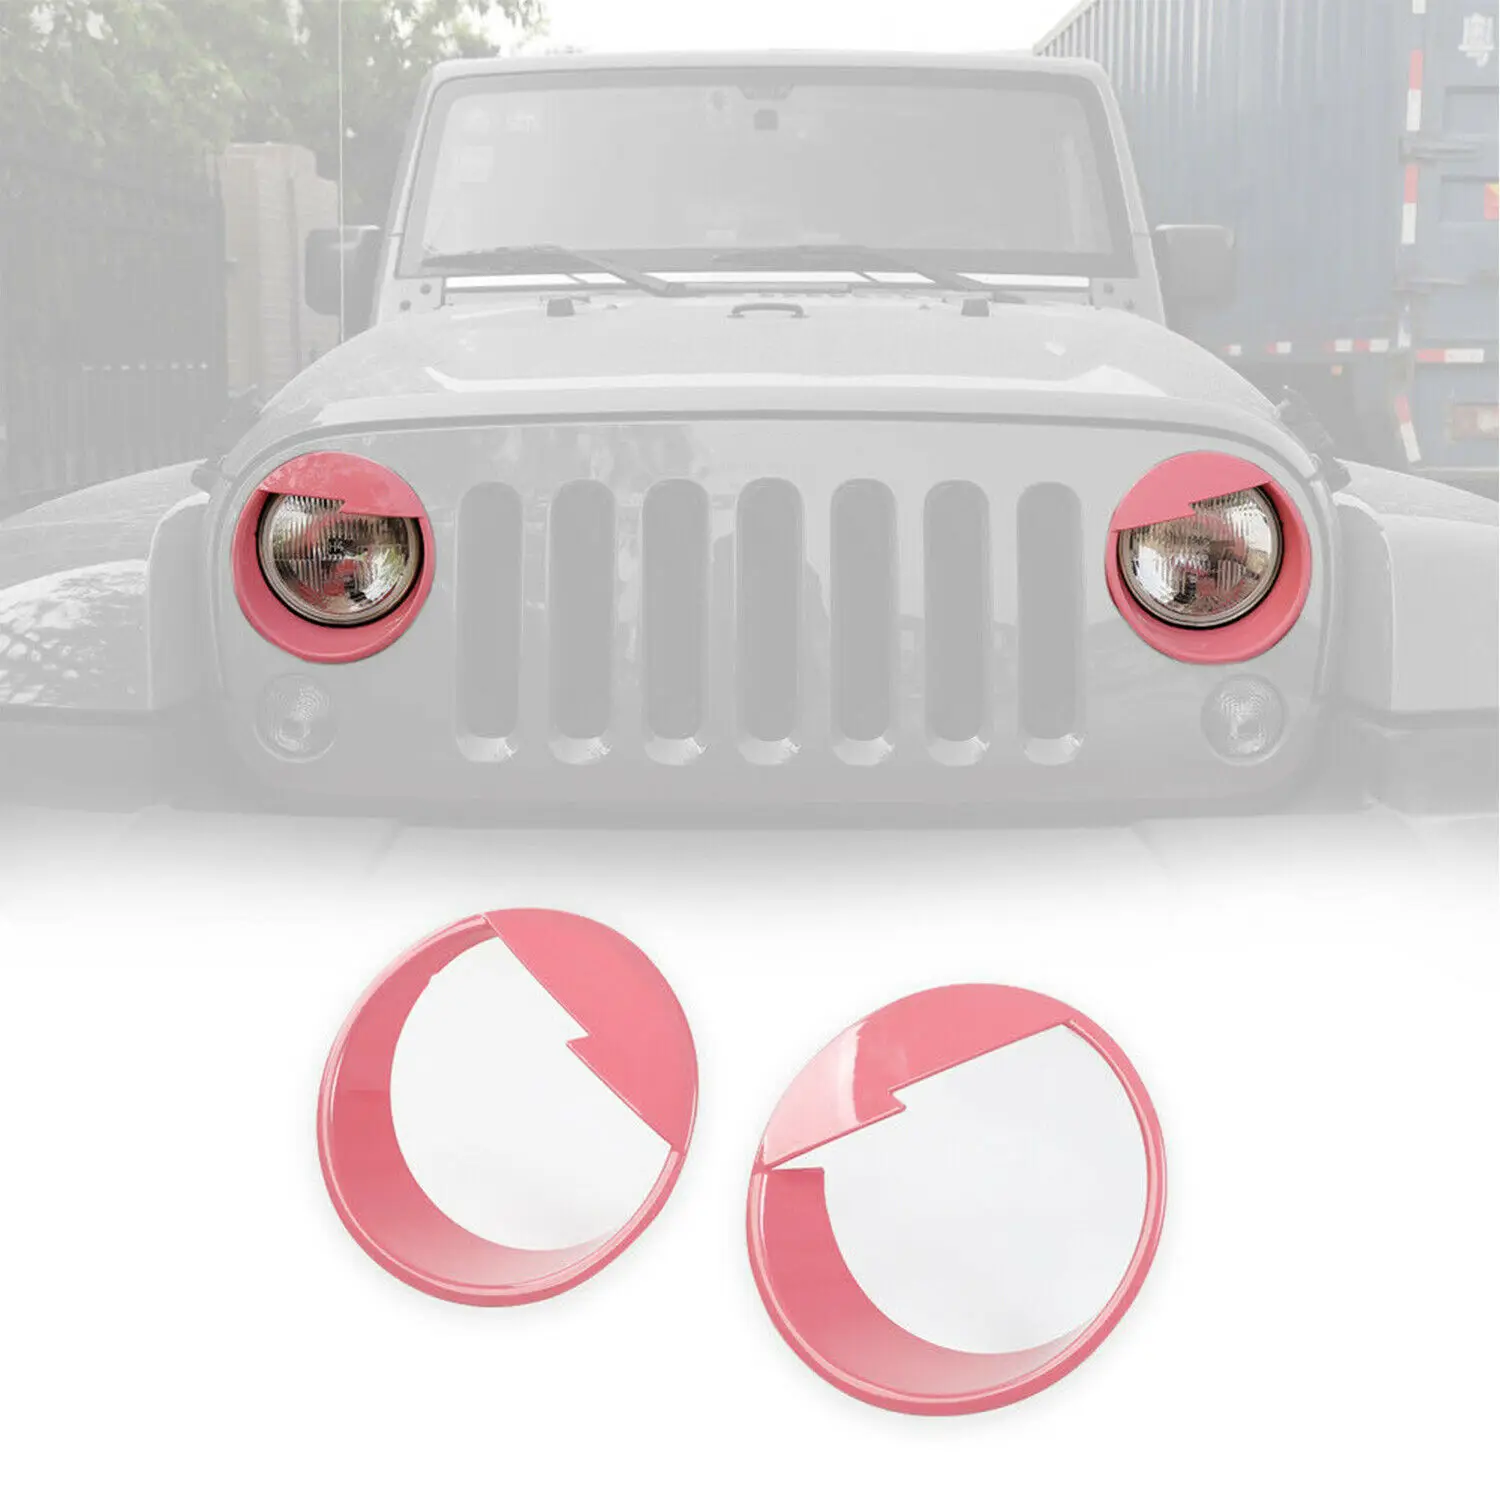 Pair Jeep-Angry-Bird URBEST Jeep Black Front Headlight Angry Bird Cover Click-in Bezels for 2007~2018 Jeep Wrangler & Wrangler Unlimited JK 